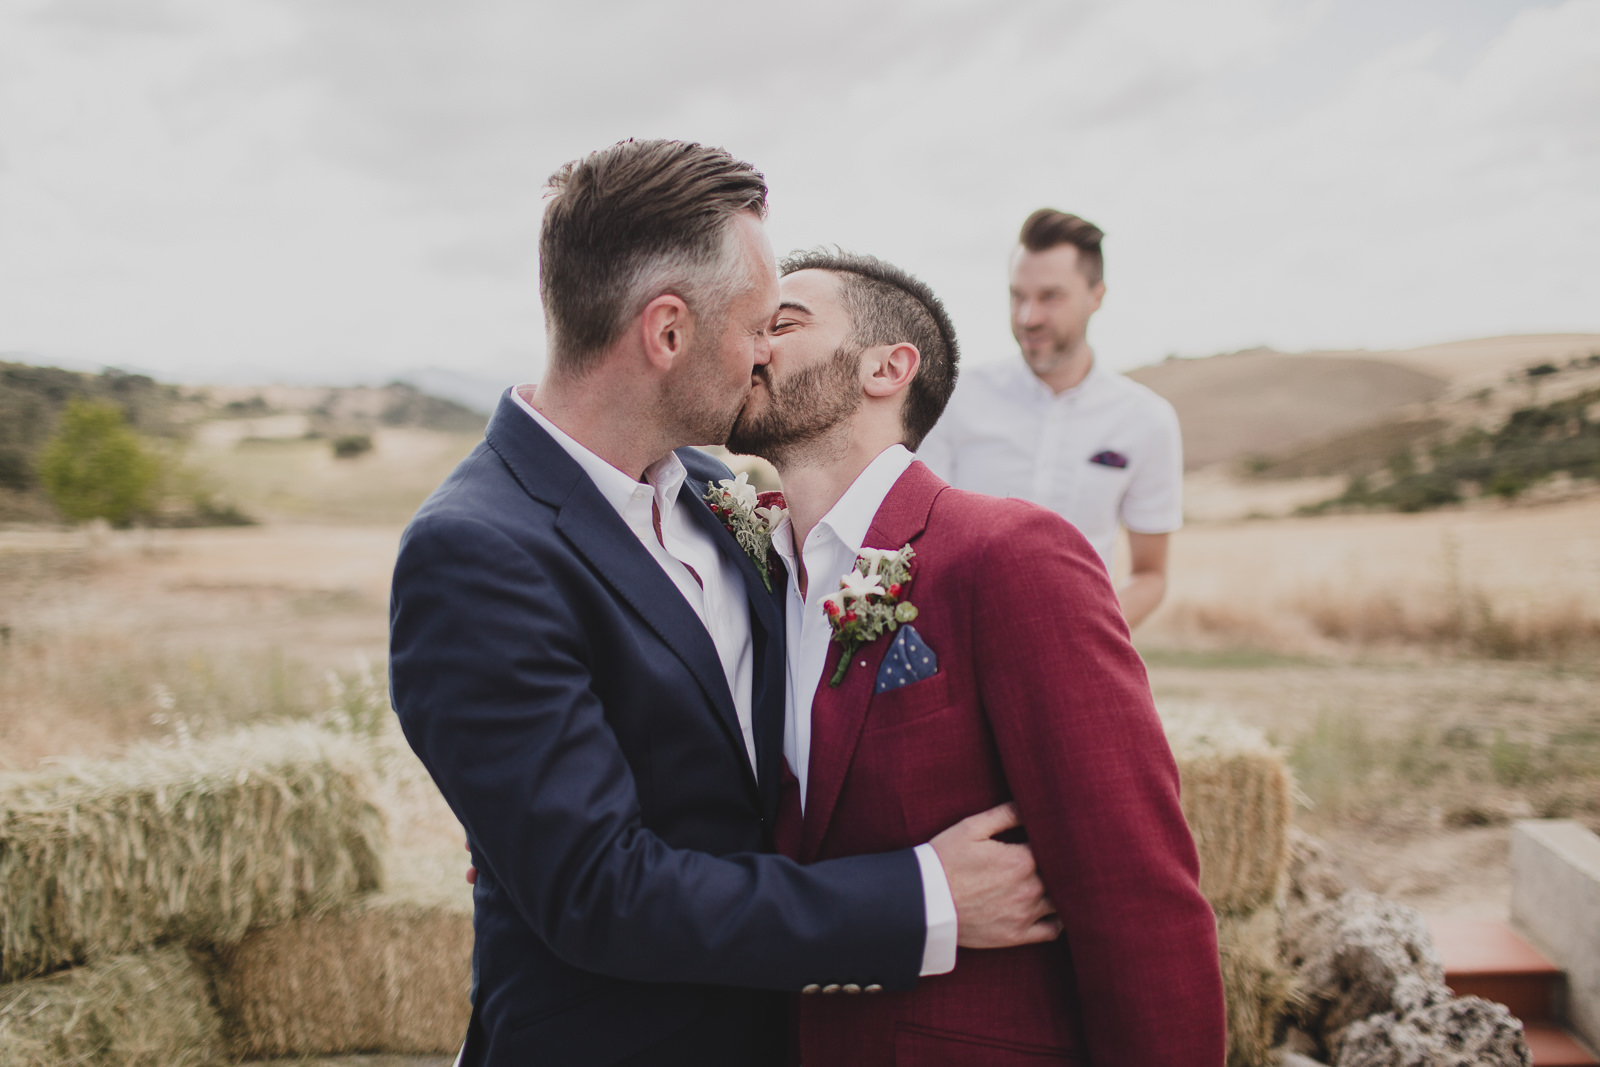 San diego, ca gay wedding officiants and wedding planners